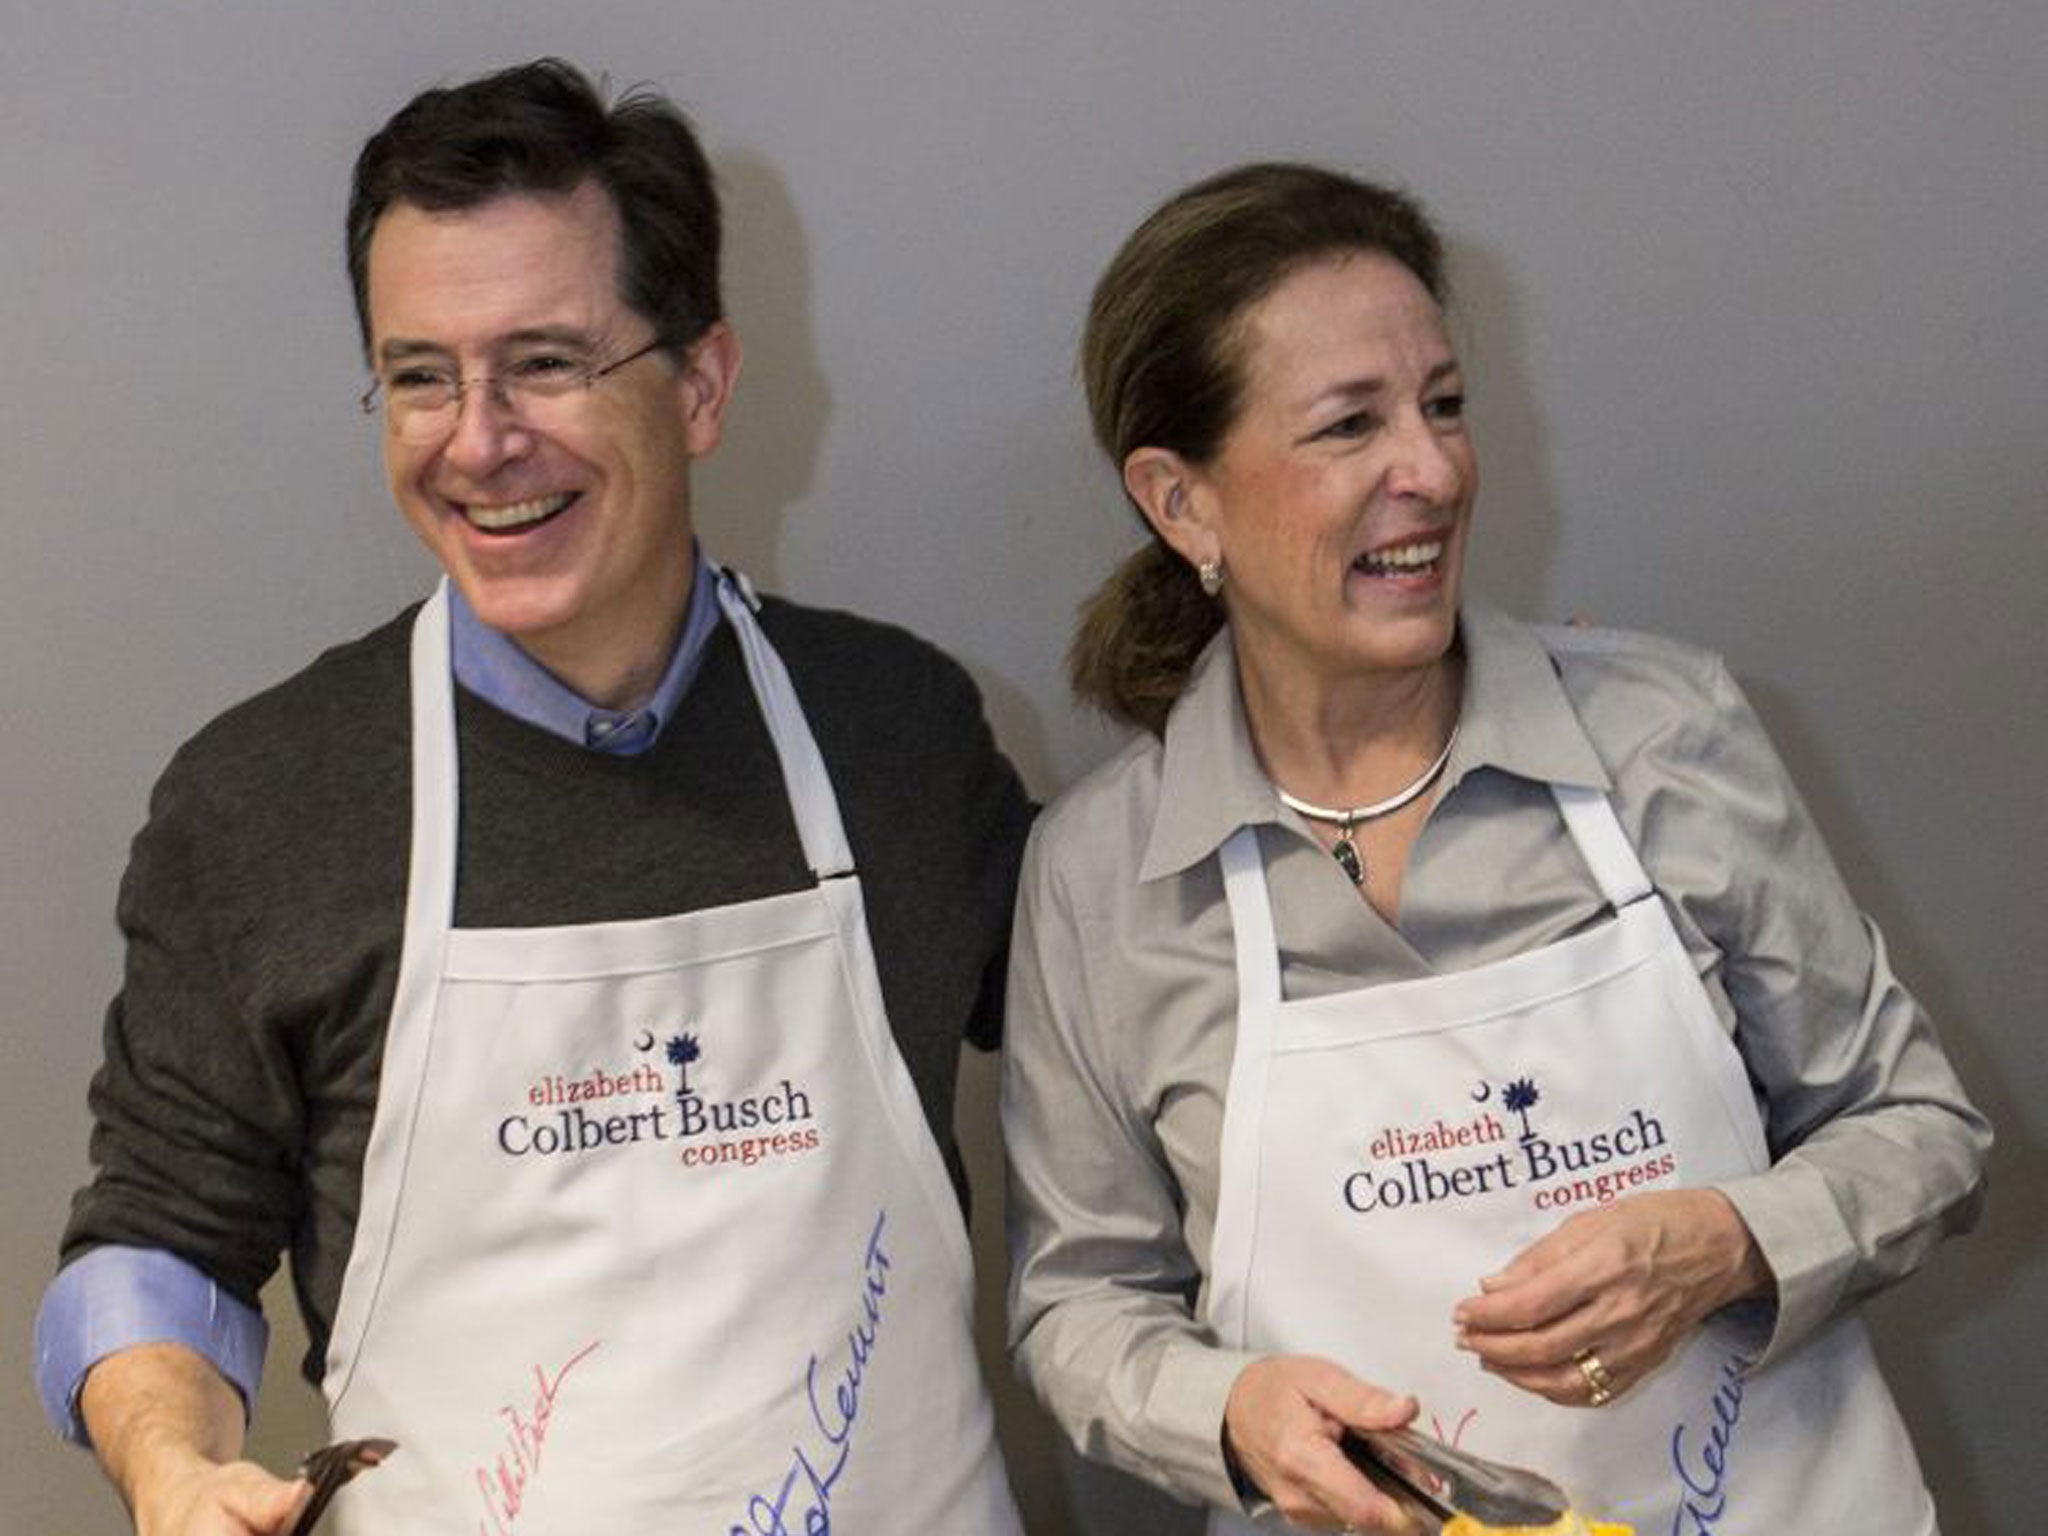 The comedian Stephen Colbert serves food with his sister, Elizabeth Colbert Busch, during a fund-raiser